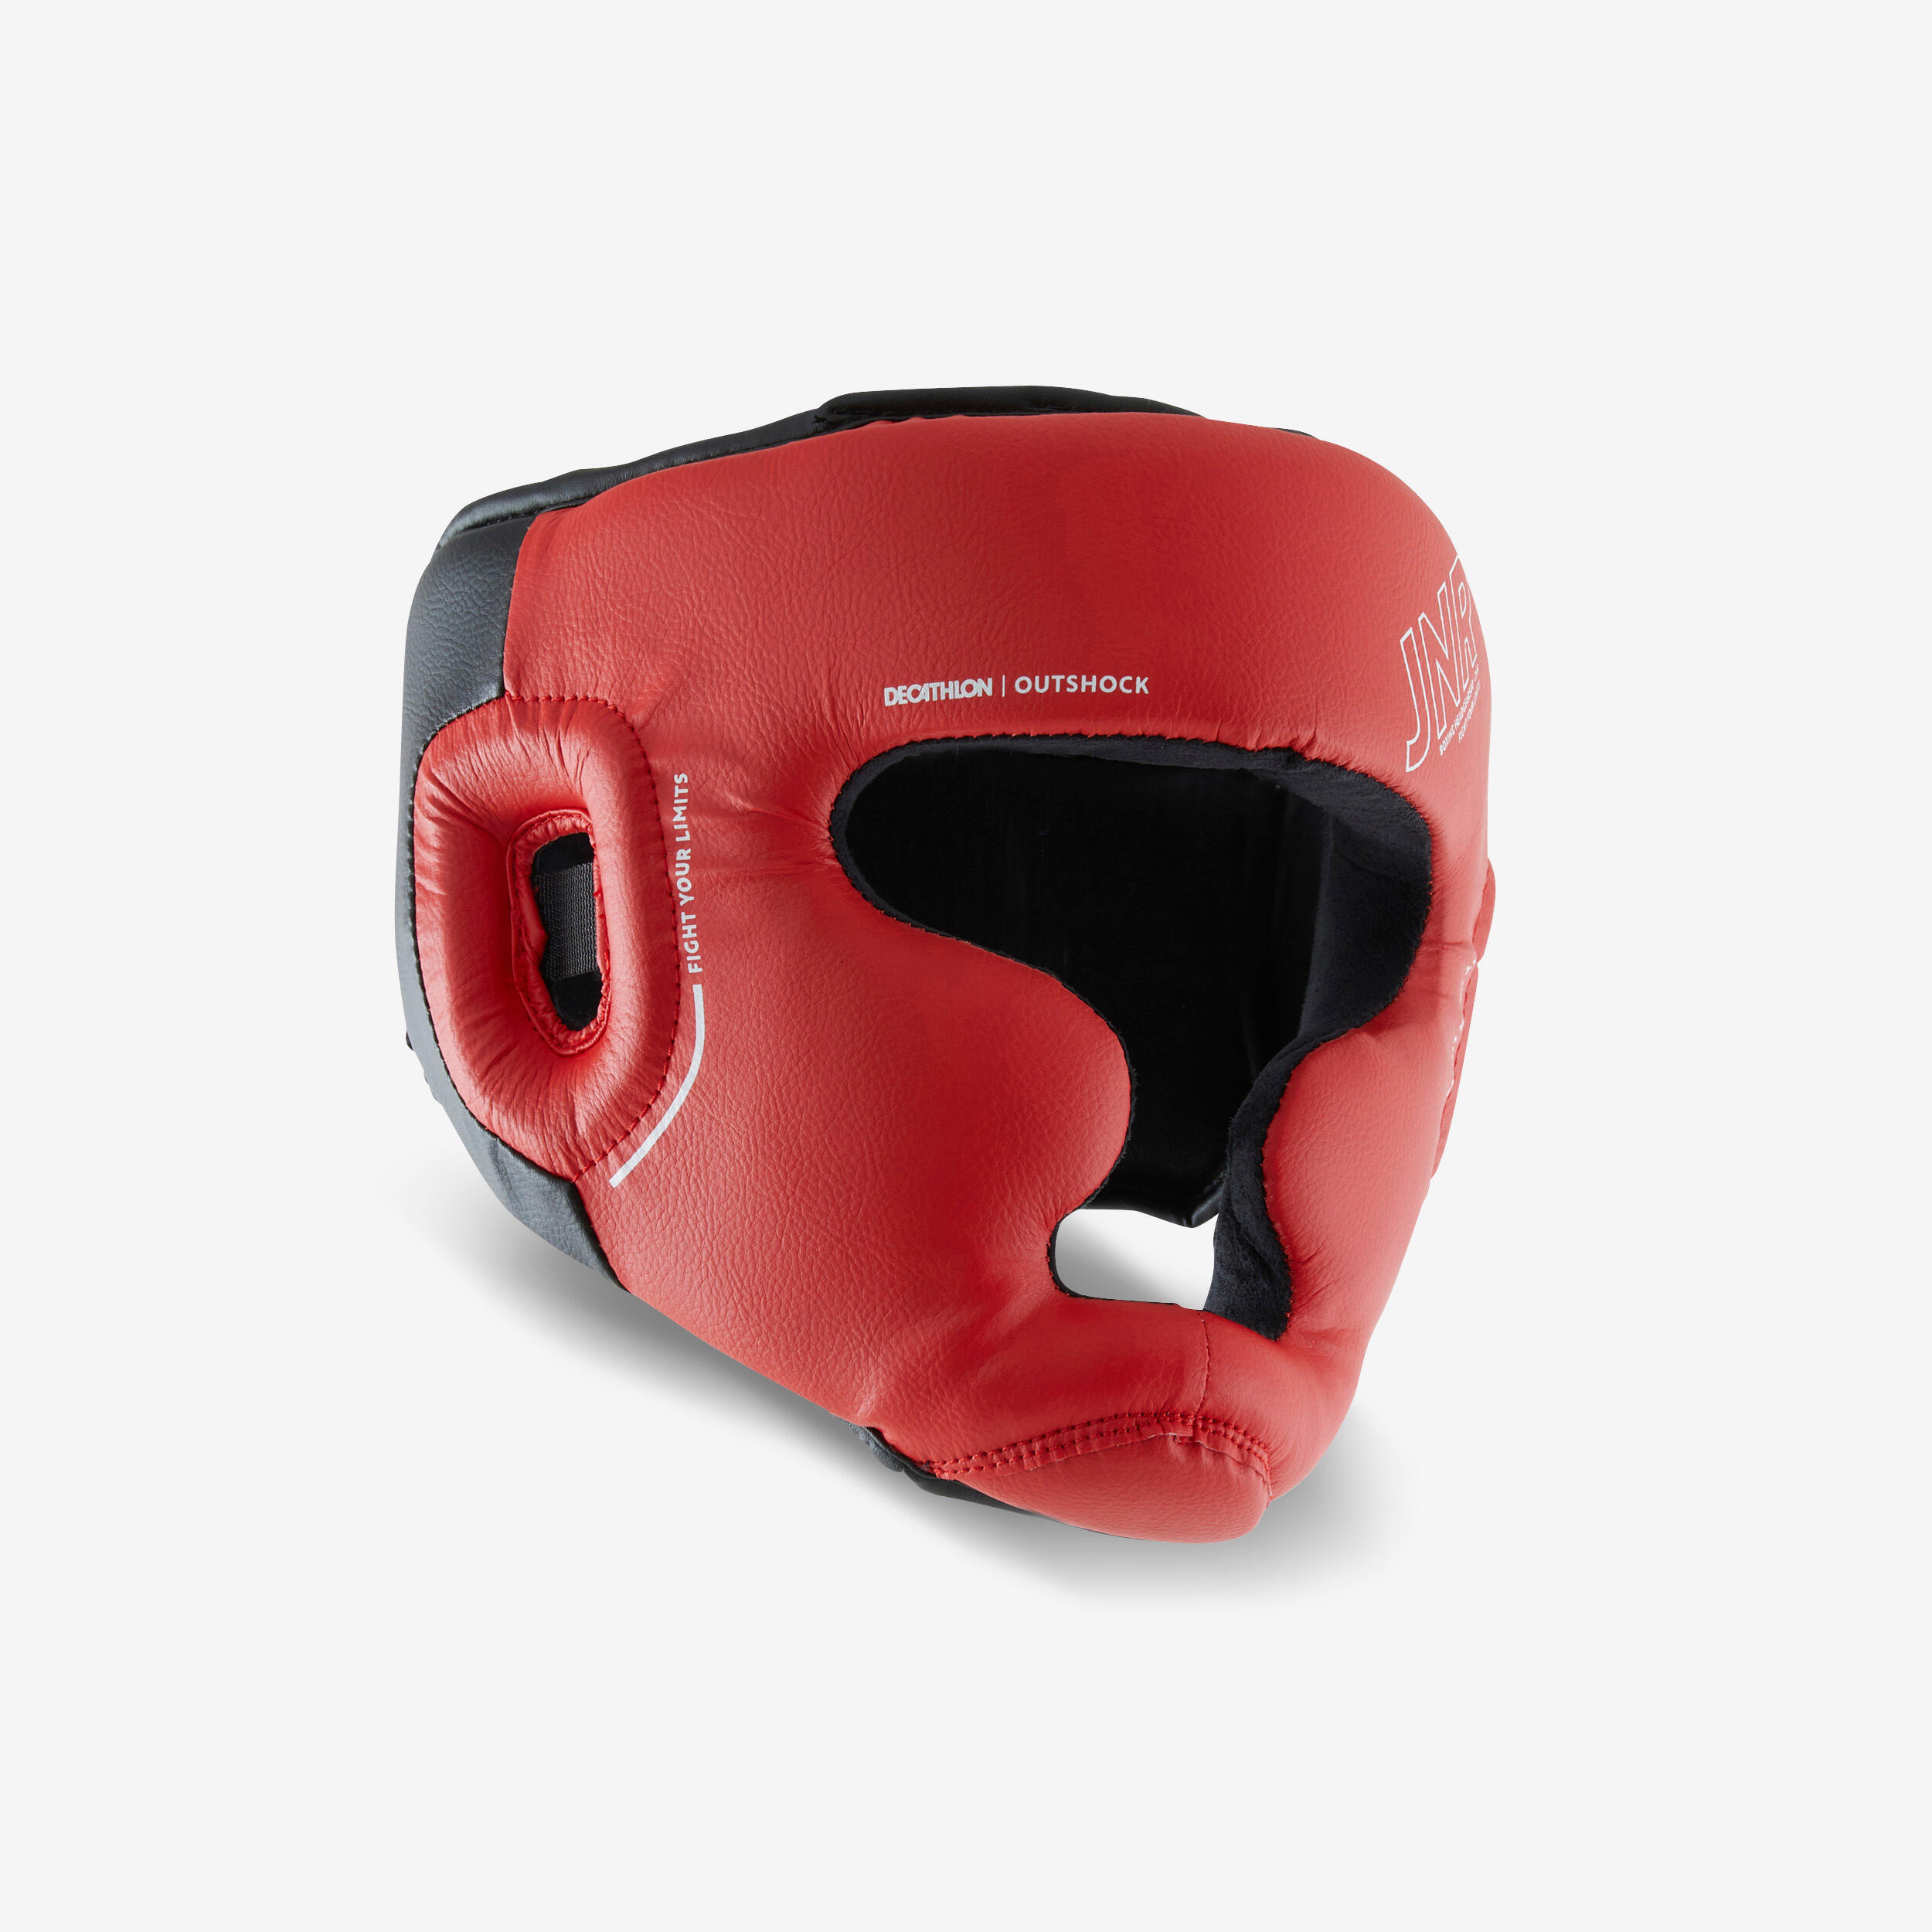 Kids' Boxing Full Face Headguard 500 - Red 1/3